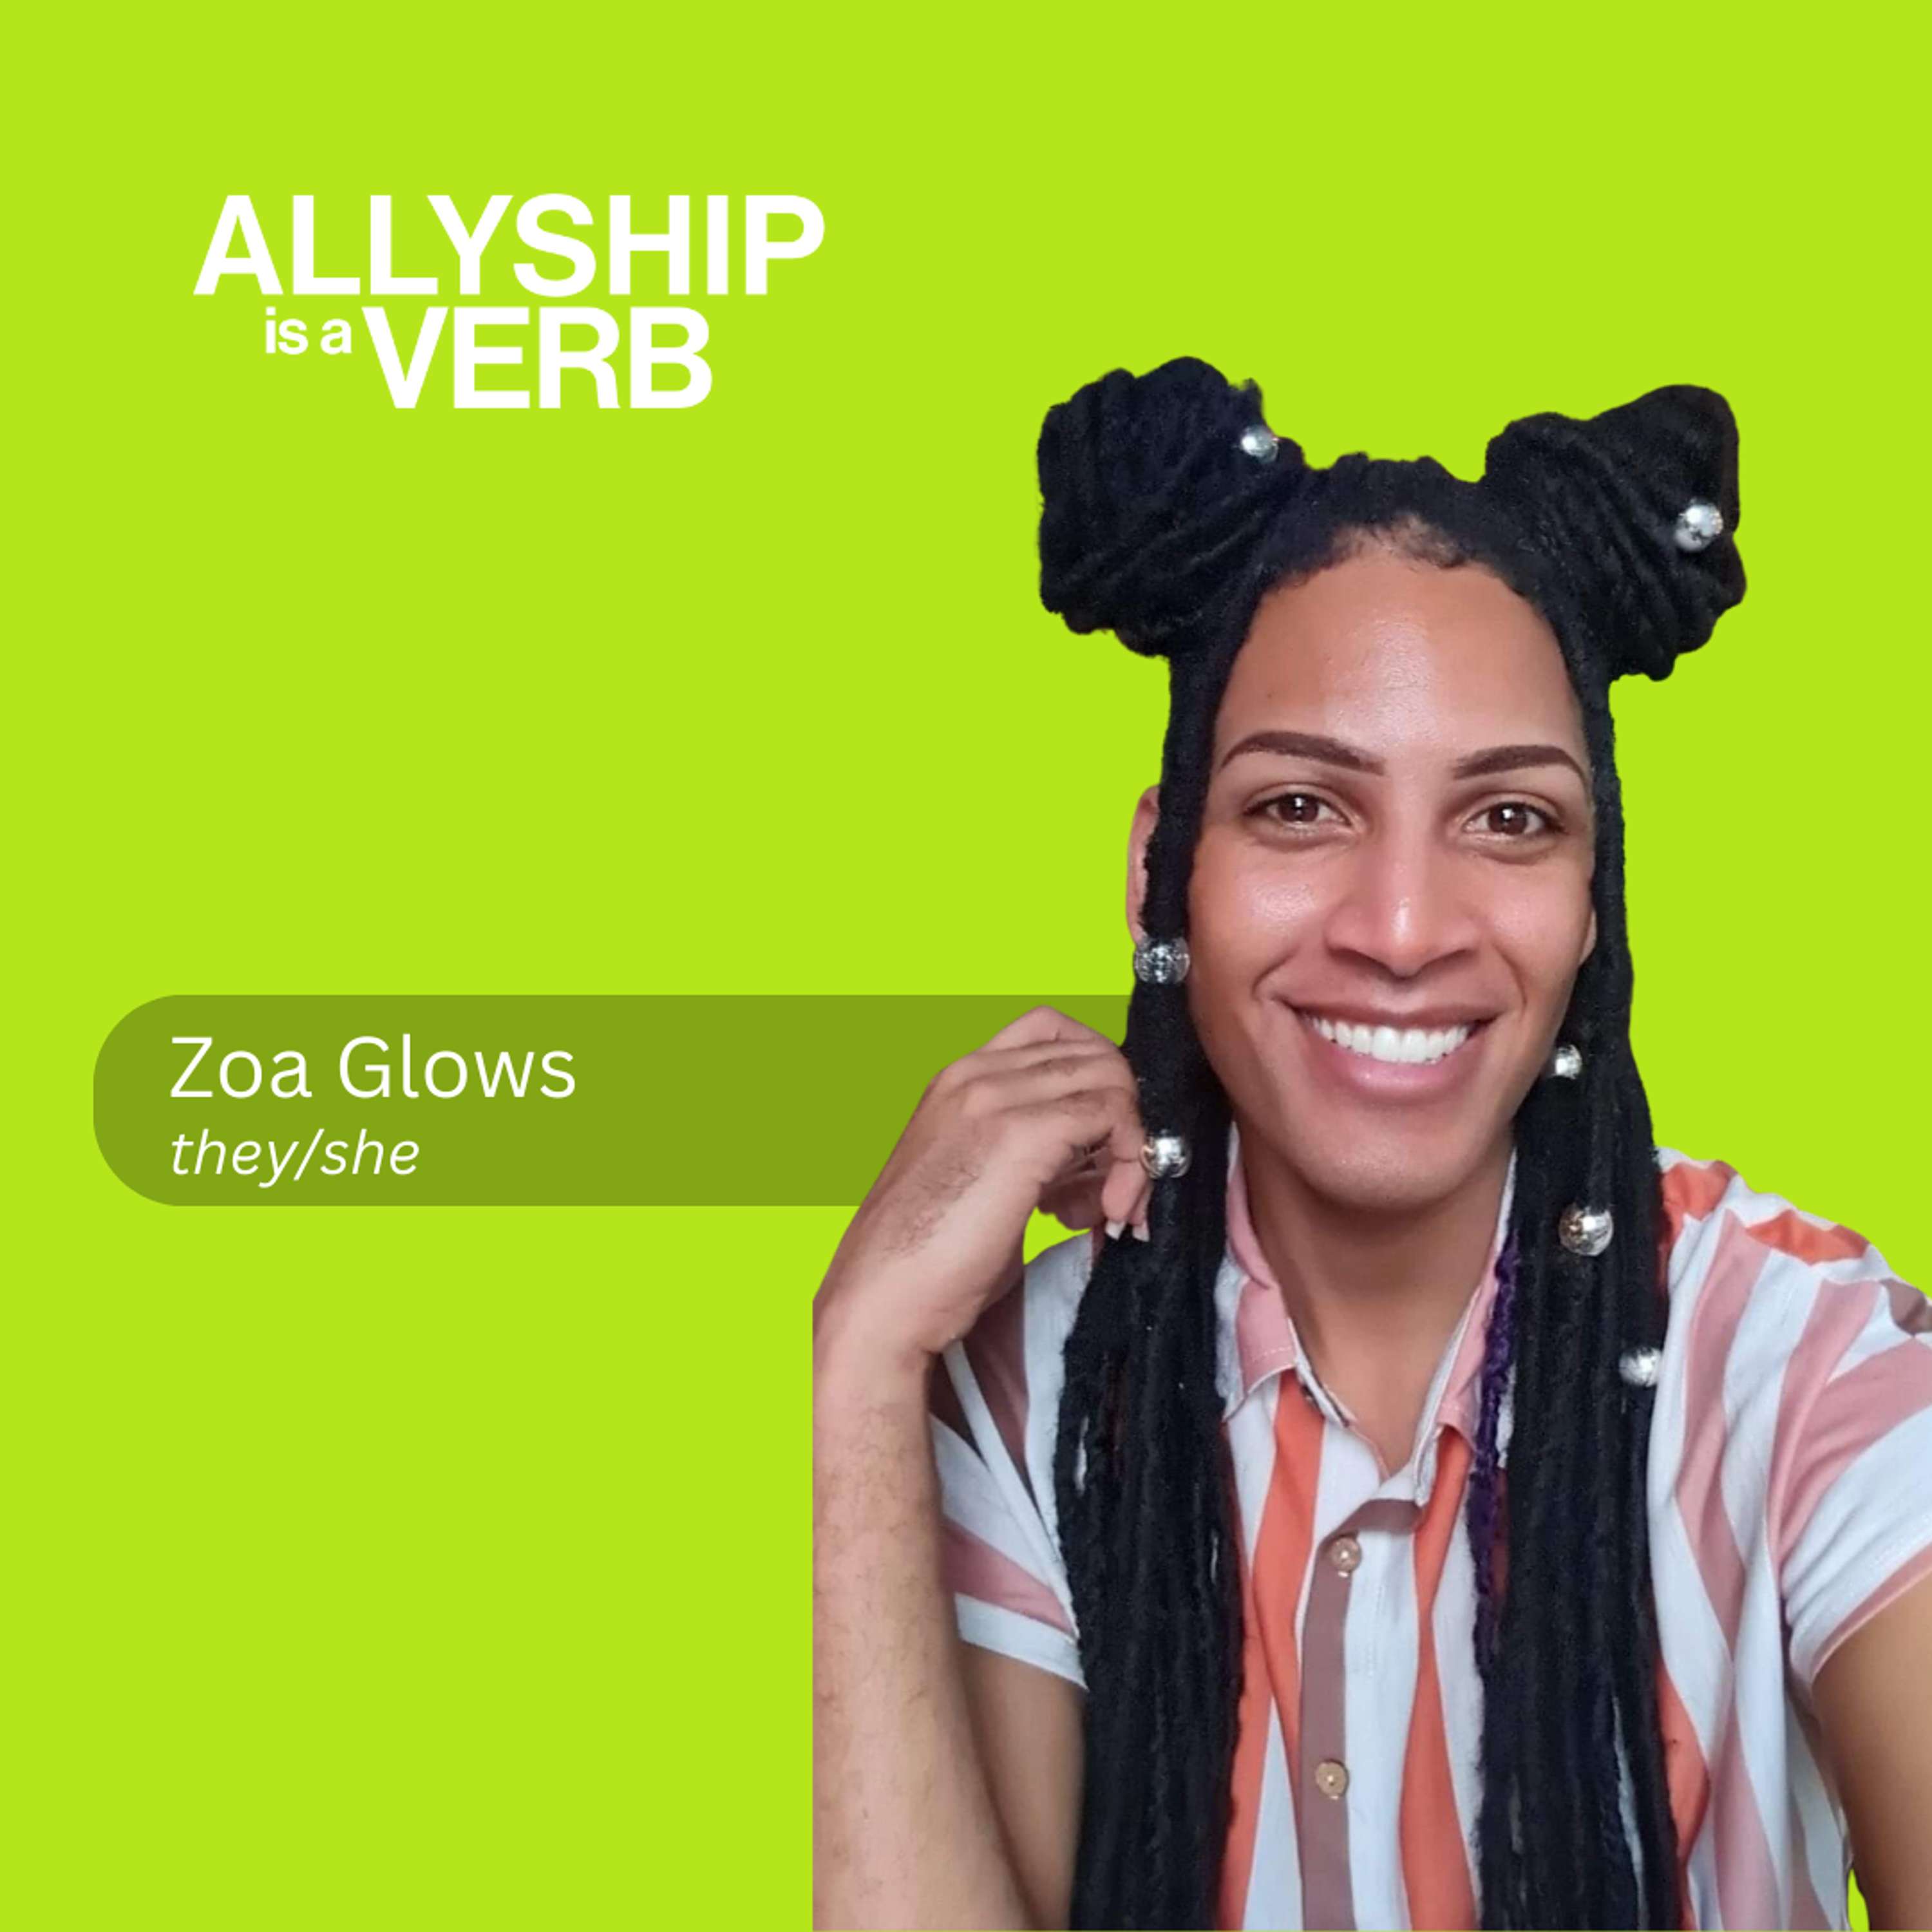 Being trans and nonbinary in the workplace feat. Zoa Glows